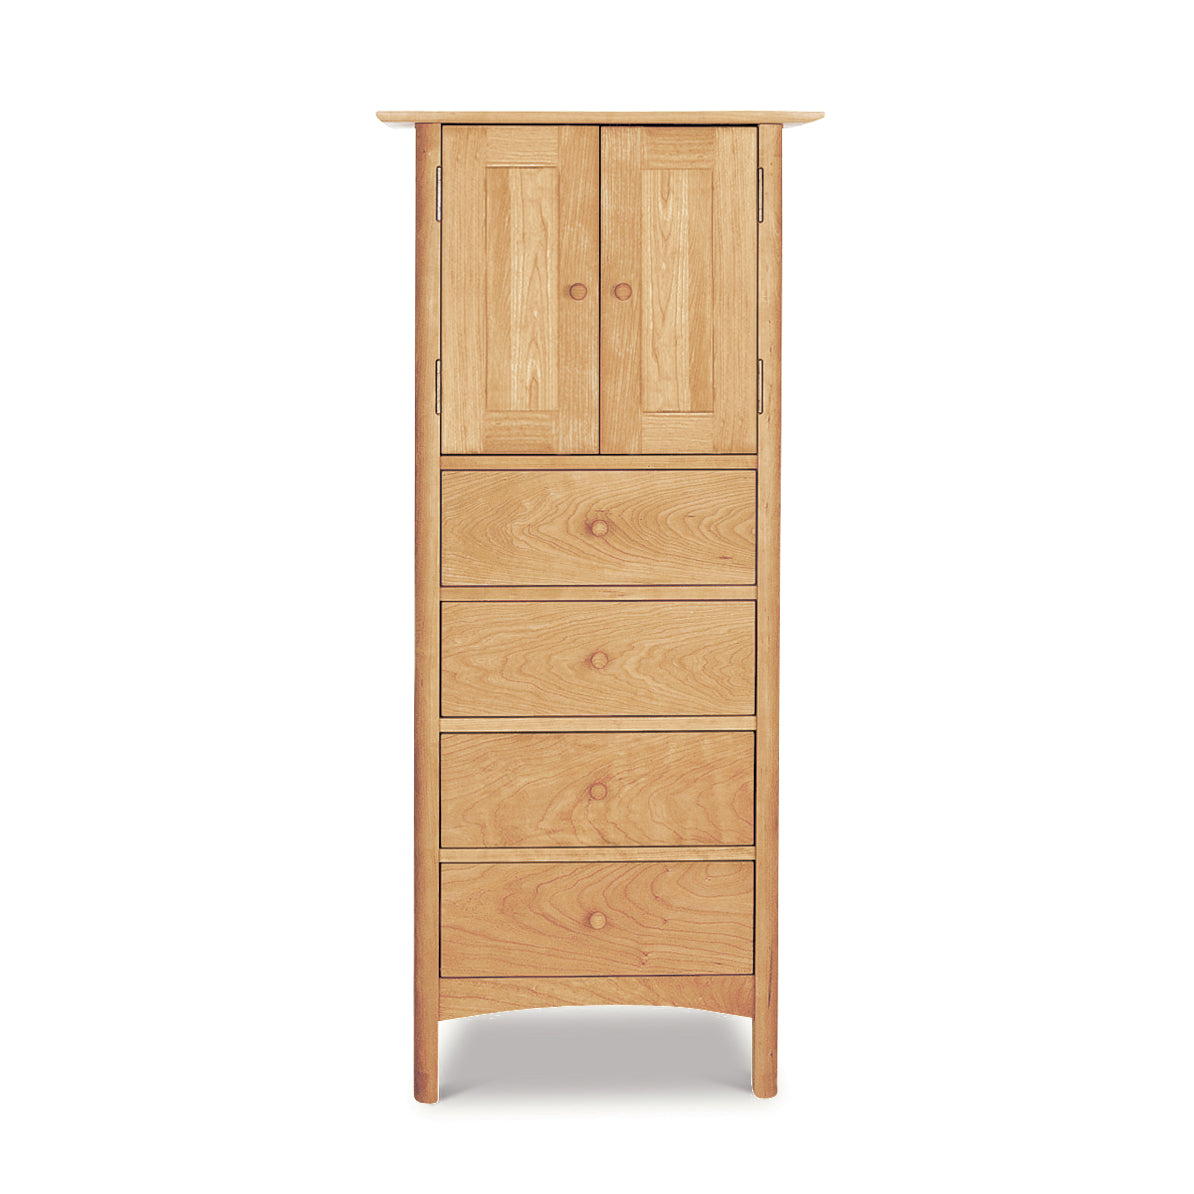 A Heartwood Shaker Tall Storage Chest tallboy dresser with two doors at the top and five drawers beneath, isolated on a white background, by Vermont Furniture Designs.